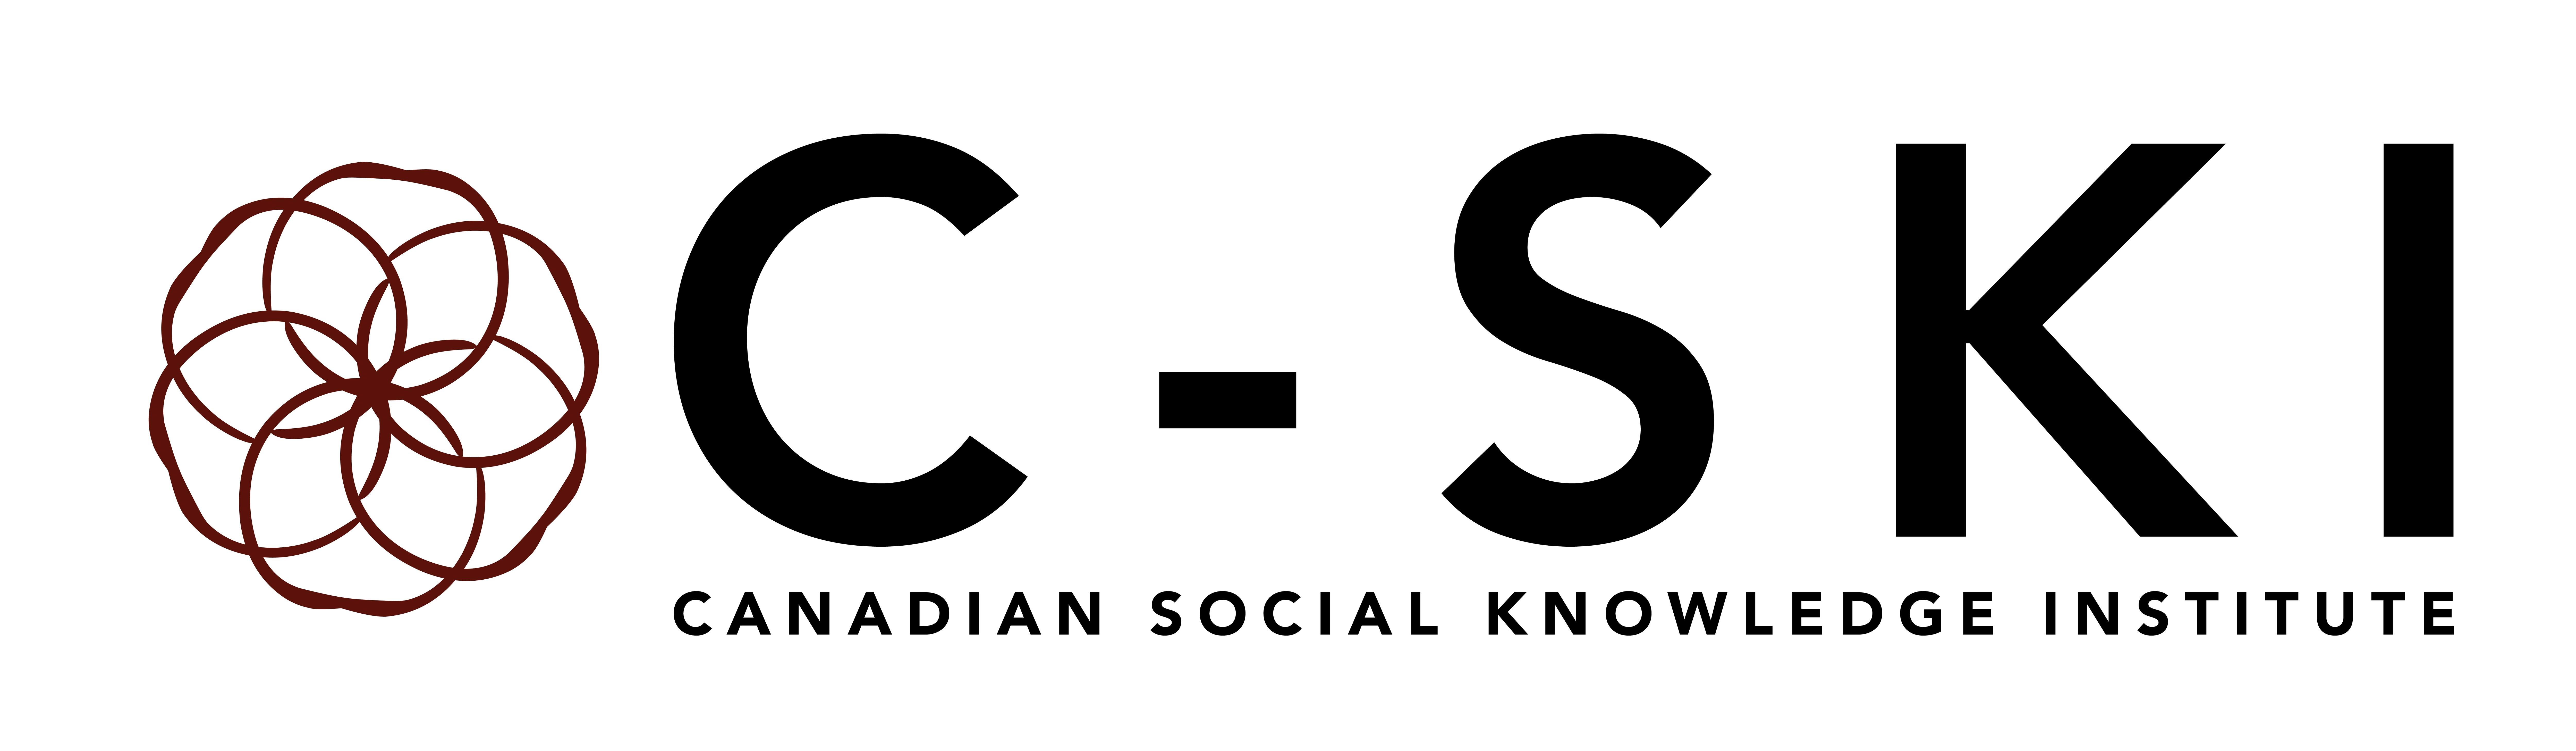 Canadian Social Knowledge Institute